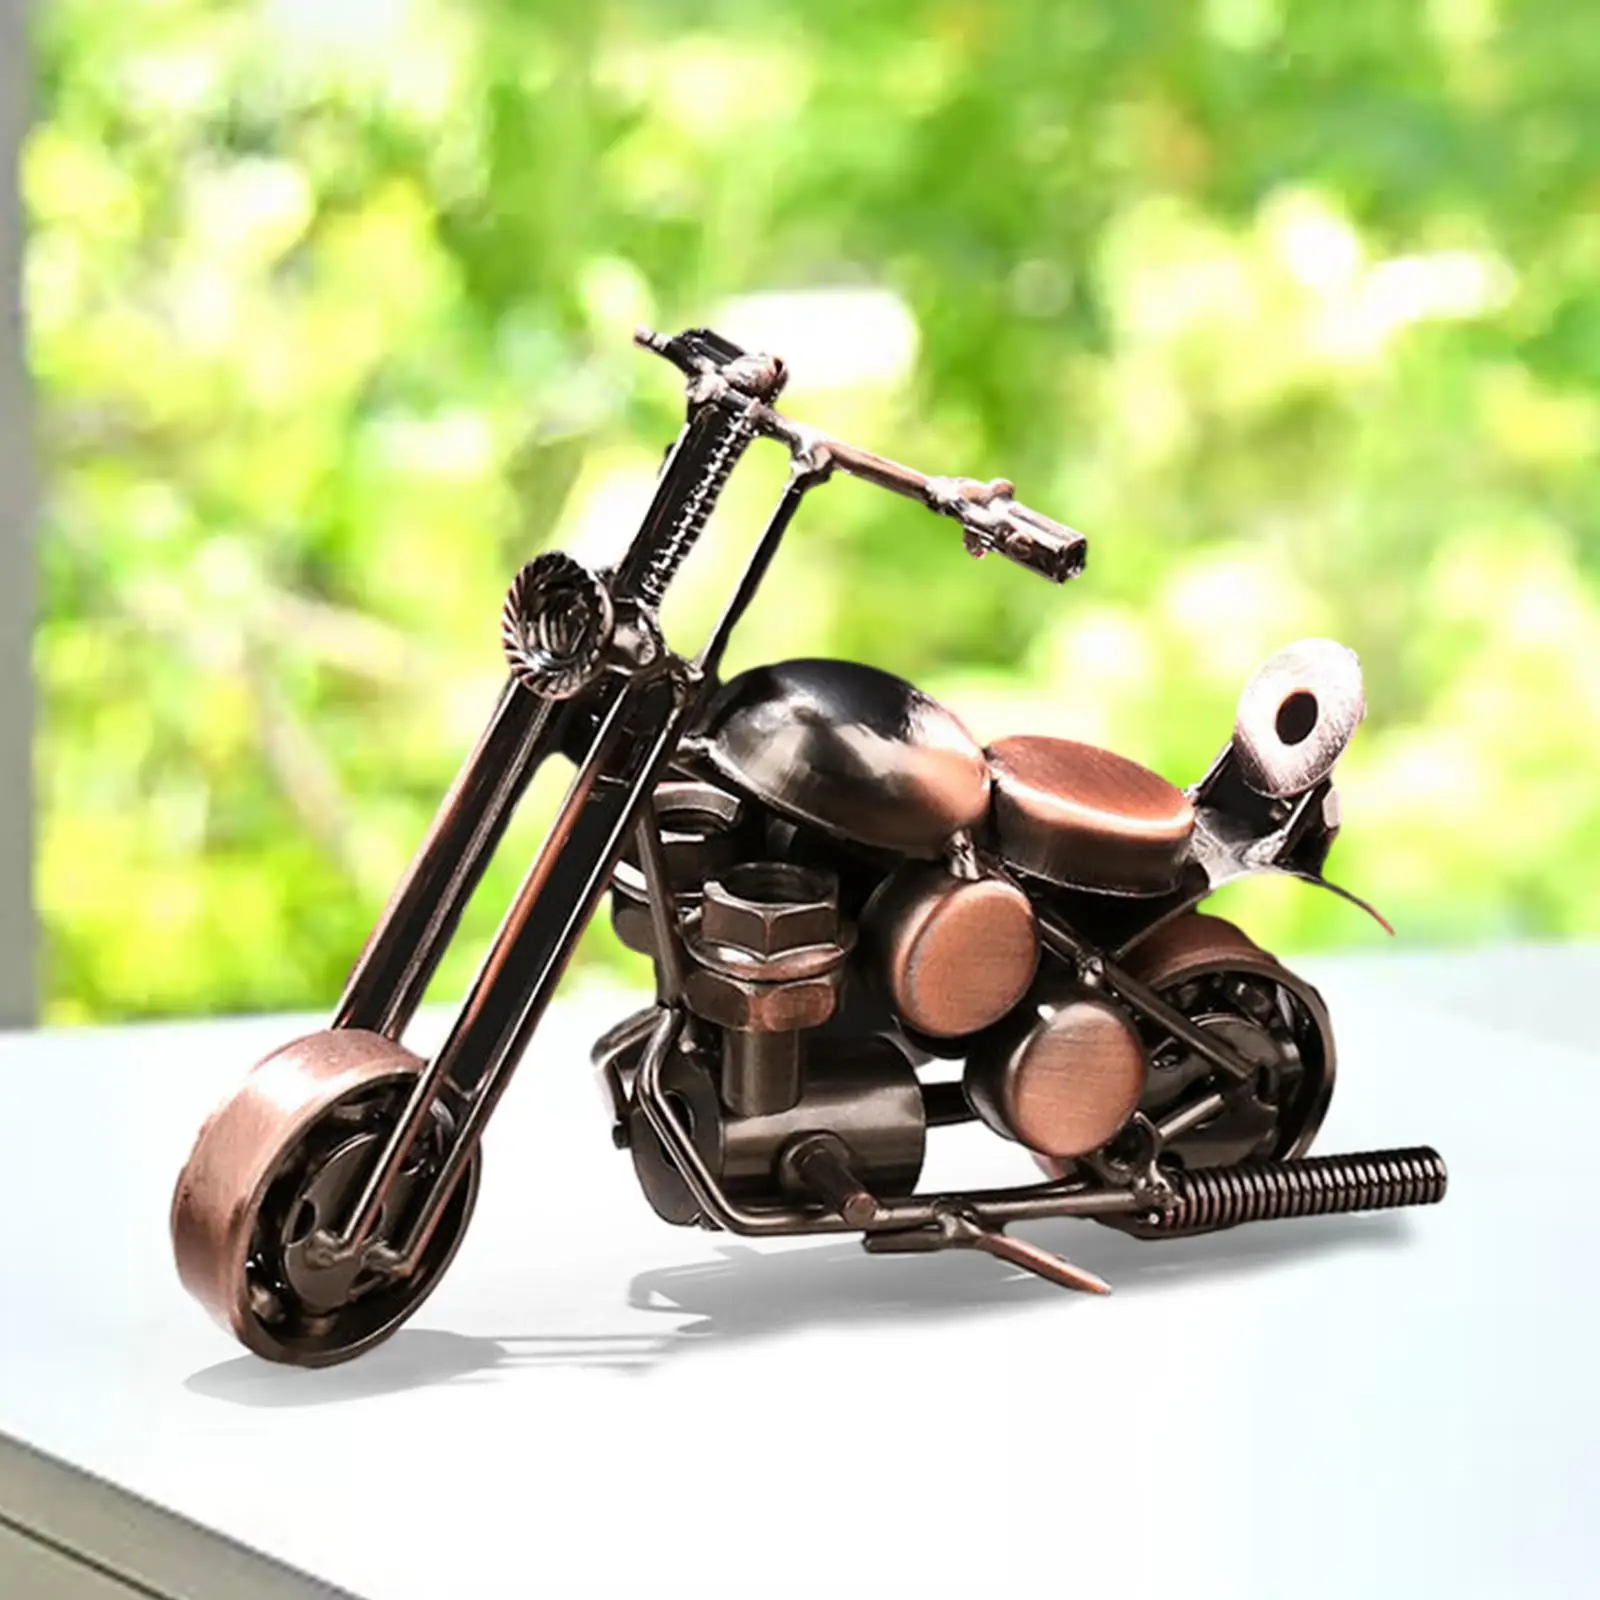 Motorcycle Model Motorcycle Sculpture Creative Figure Decoration Collectible for Bookshelf Home Desktop Motorcycle Lovers Son